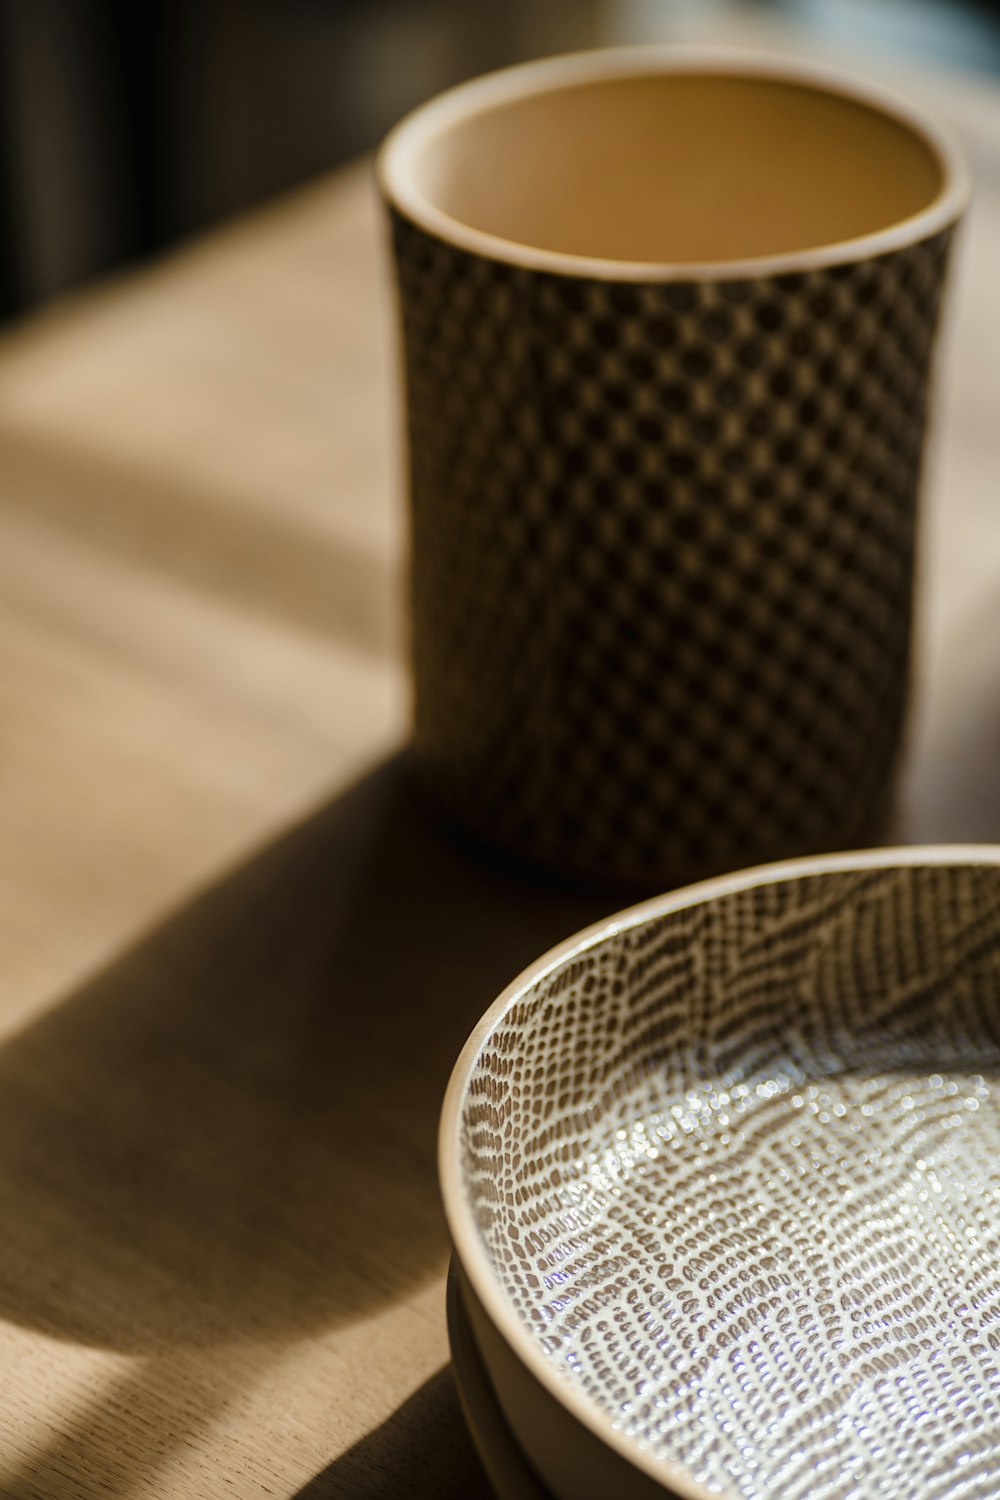 a close up of a plate and a cup on a table